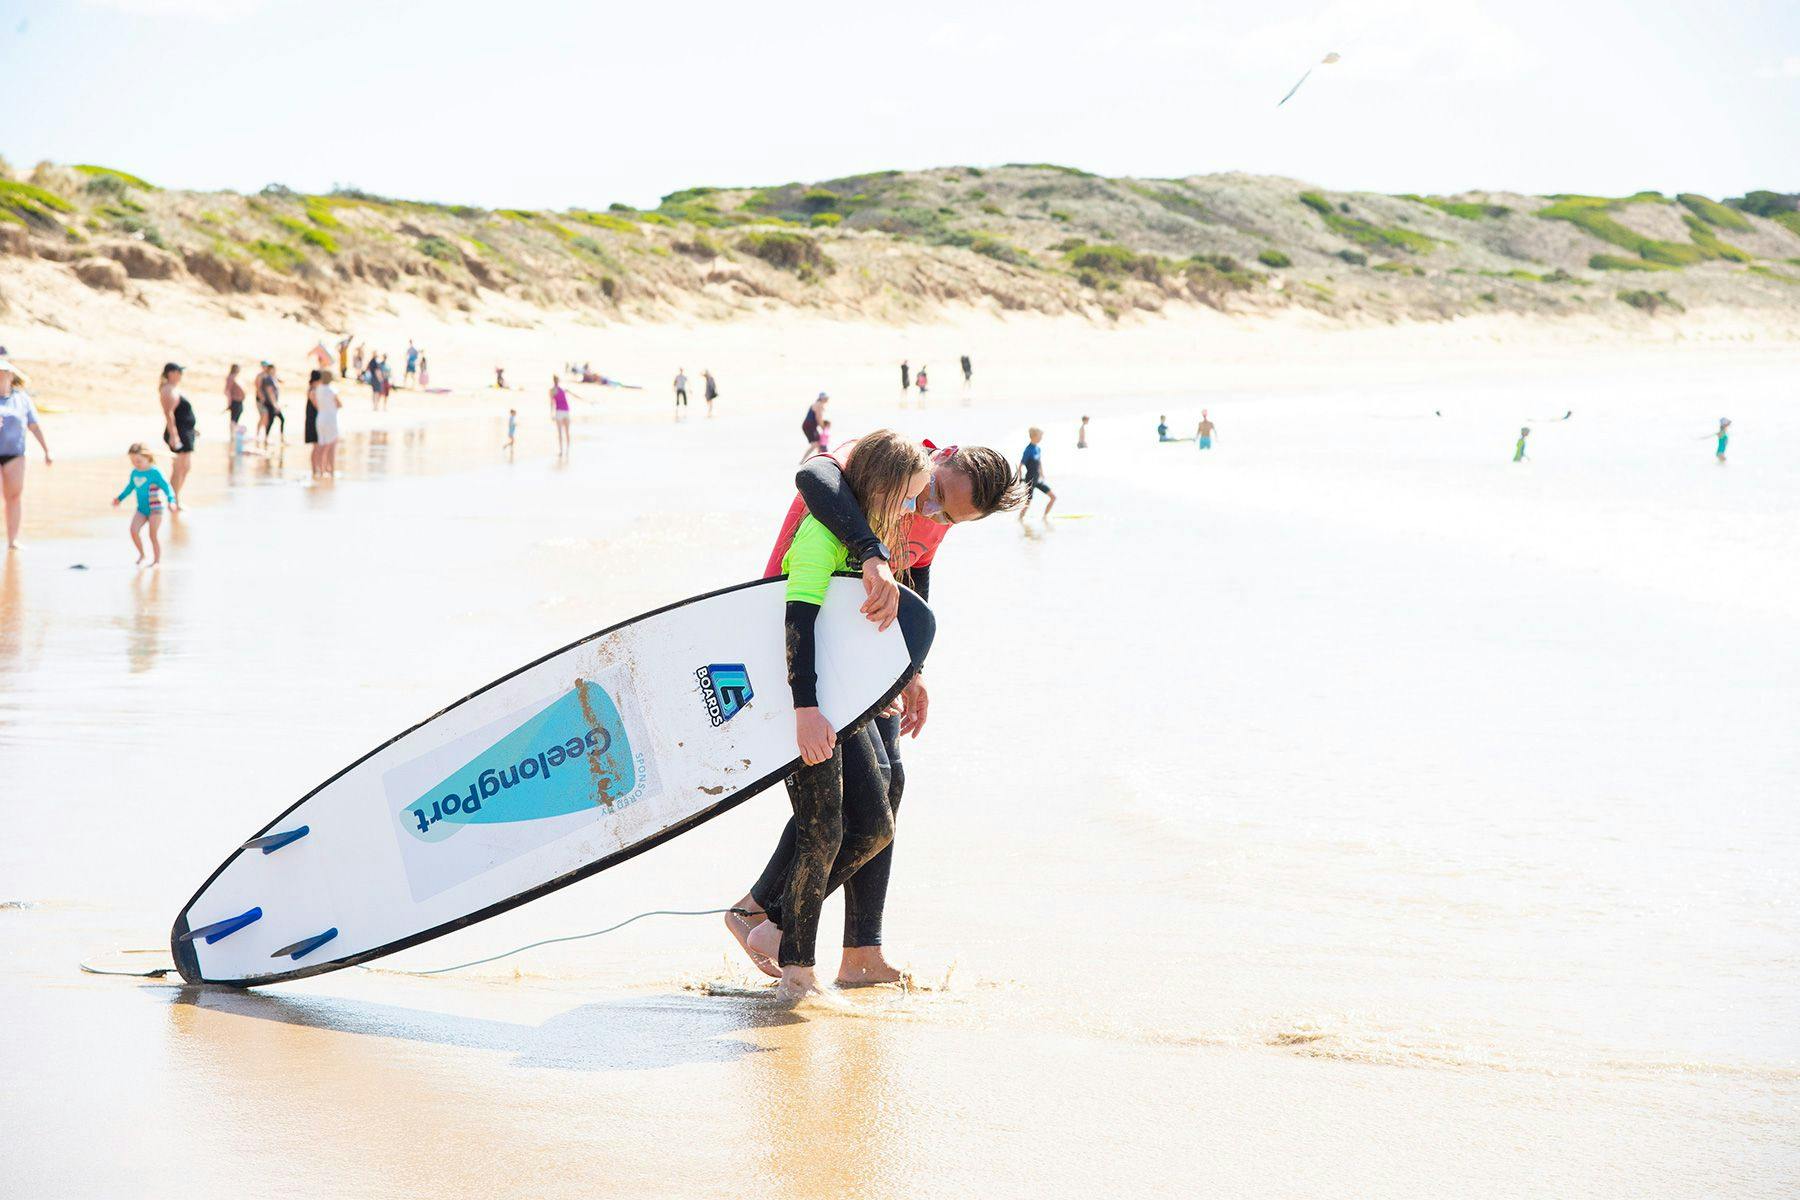 young person learning to surf and their surf coach carrying a surfboard to the ocean